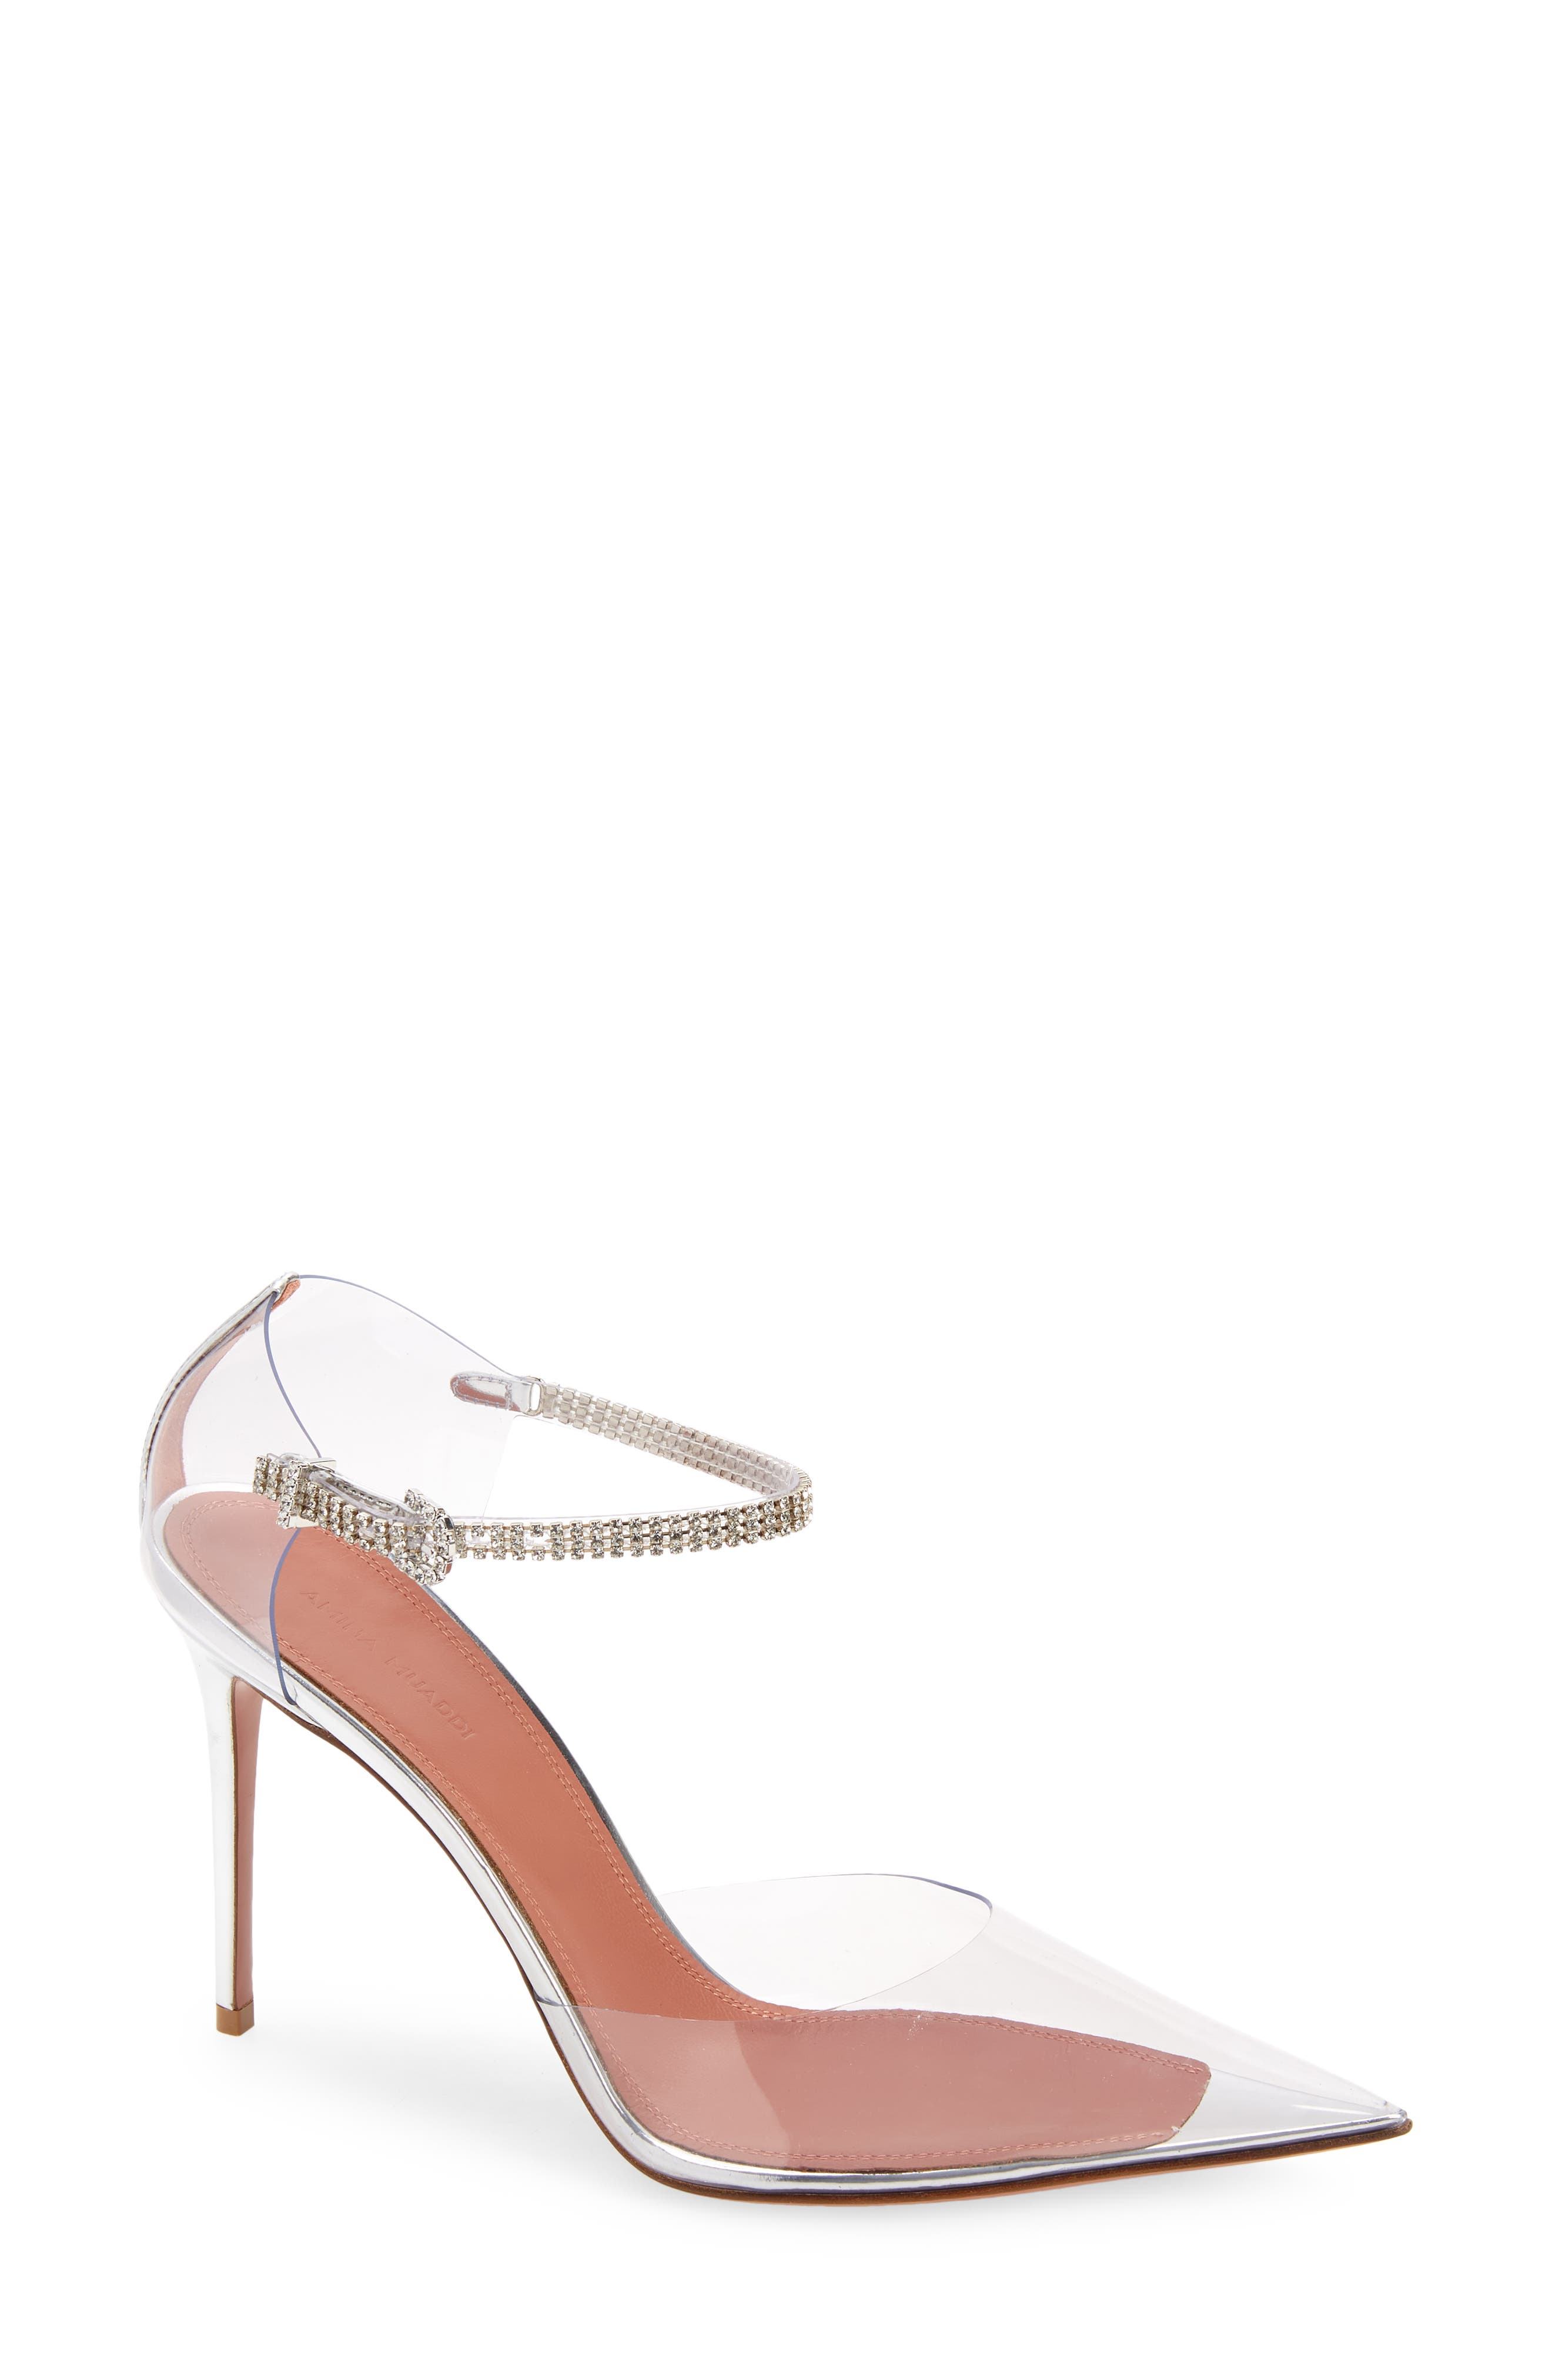 Amina Muaddi Ursina Crystal Strap Pointed Toe Clear Pump in Pvc Transparent /Crystals at Nordstrom, Size 6Us